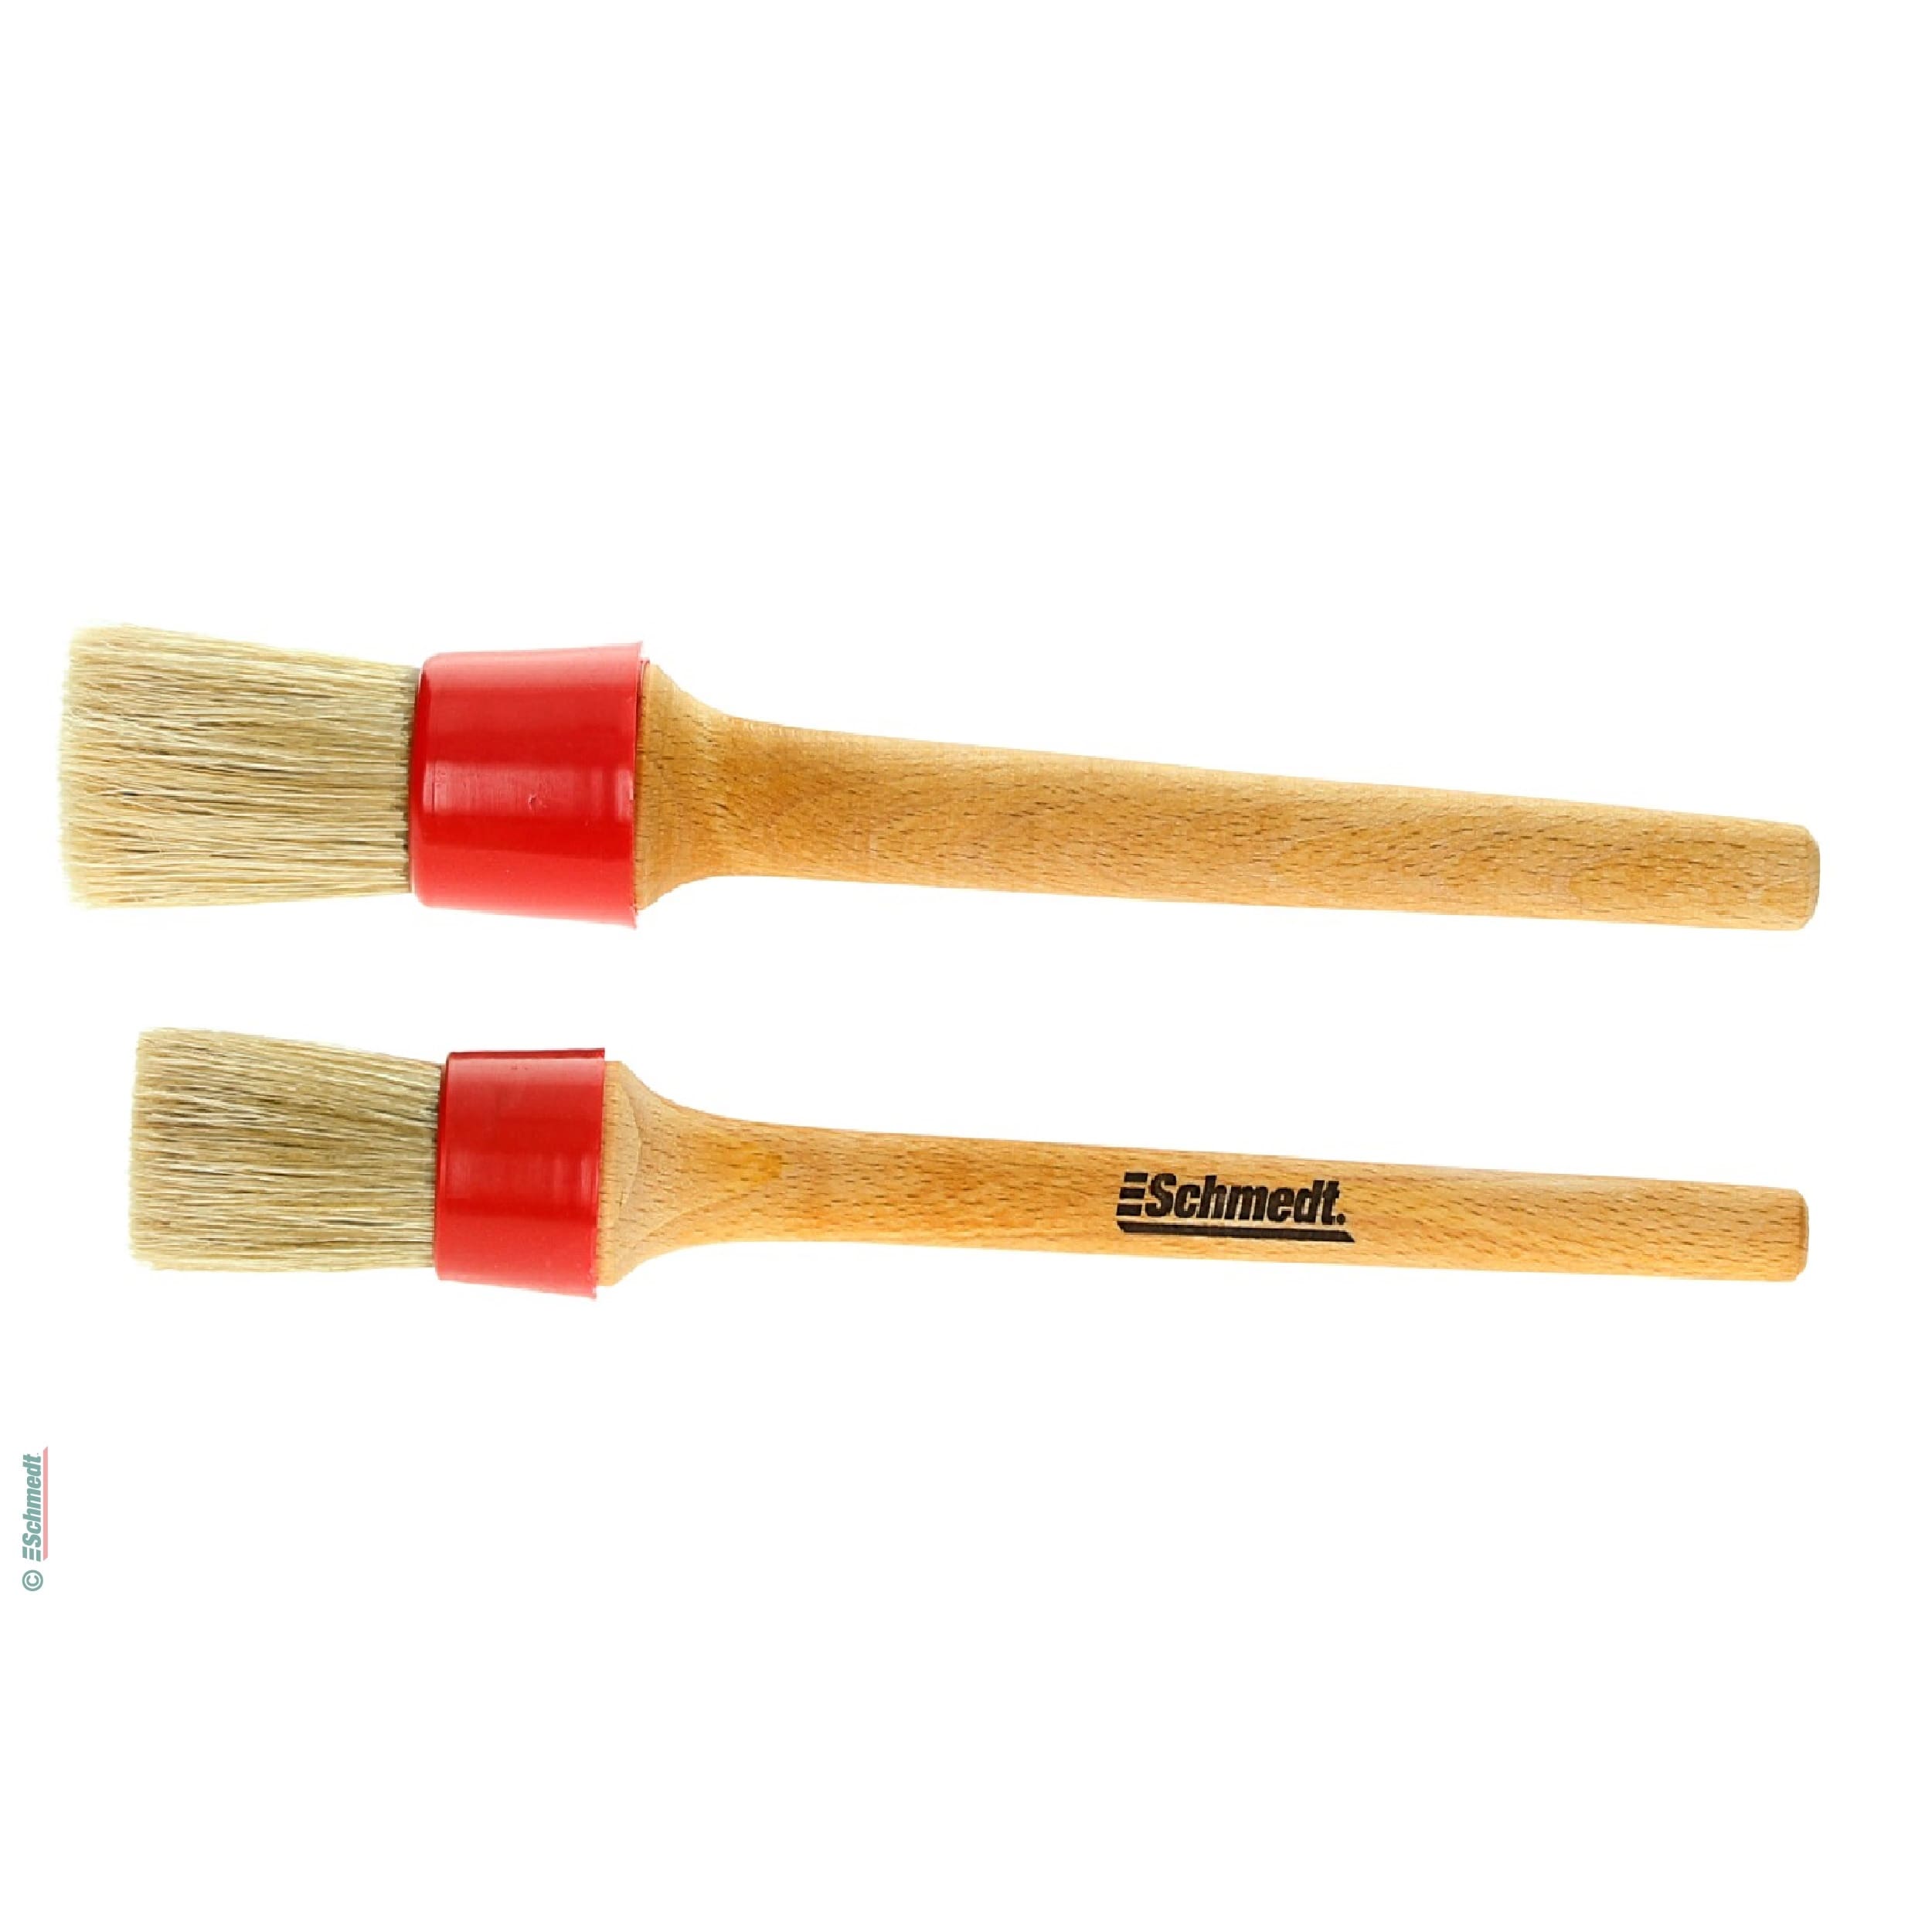 Round brushes  Brushes for bookbinding and restoration